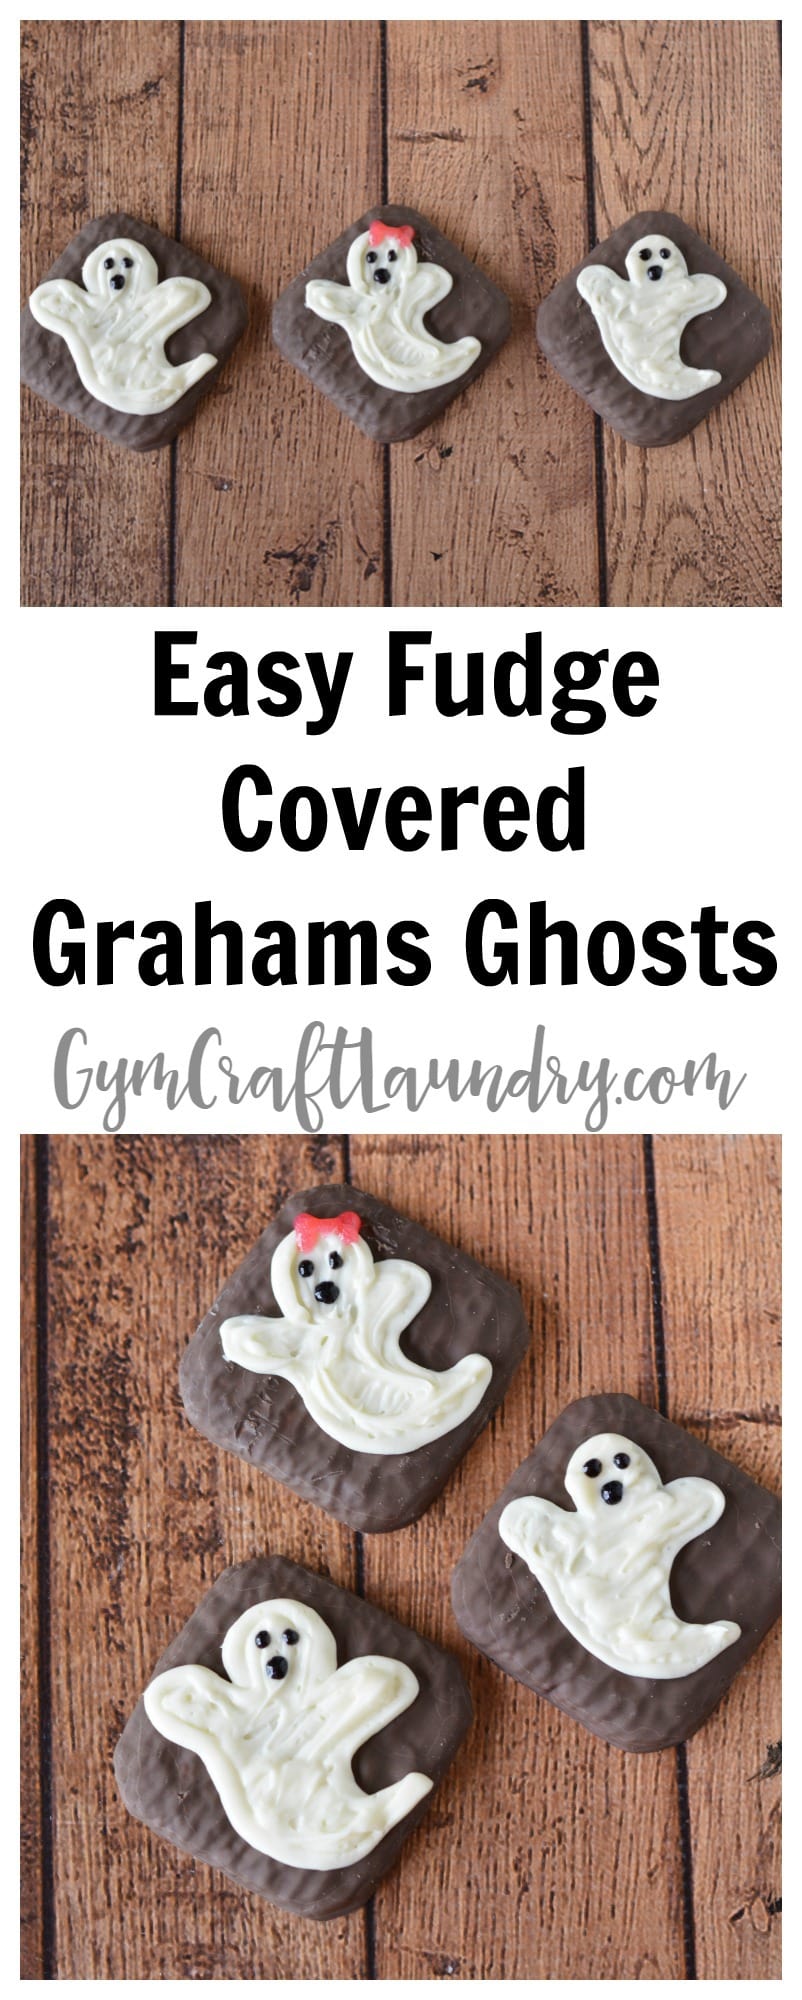 Make these super cute Halloween Treats! Easy Fudge Covered Graham Ghosts.